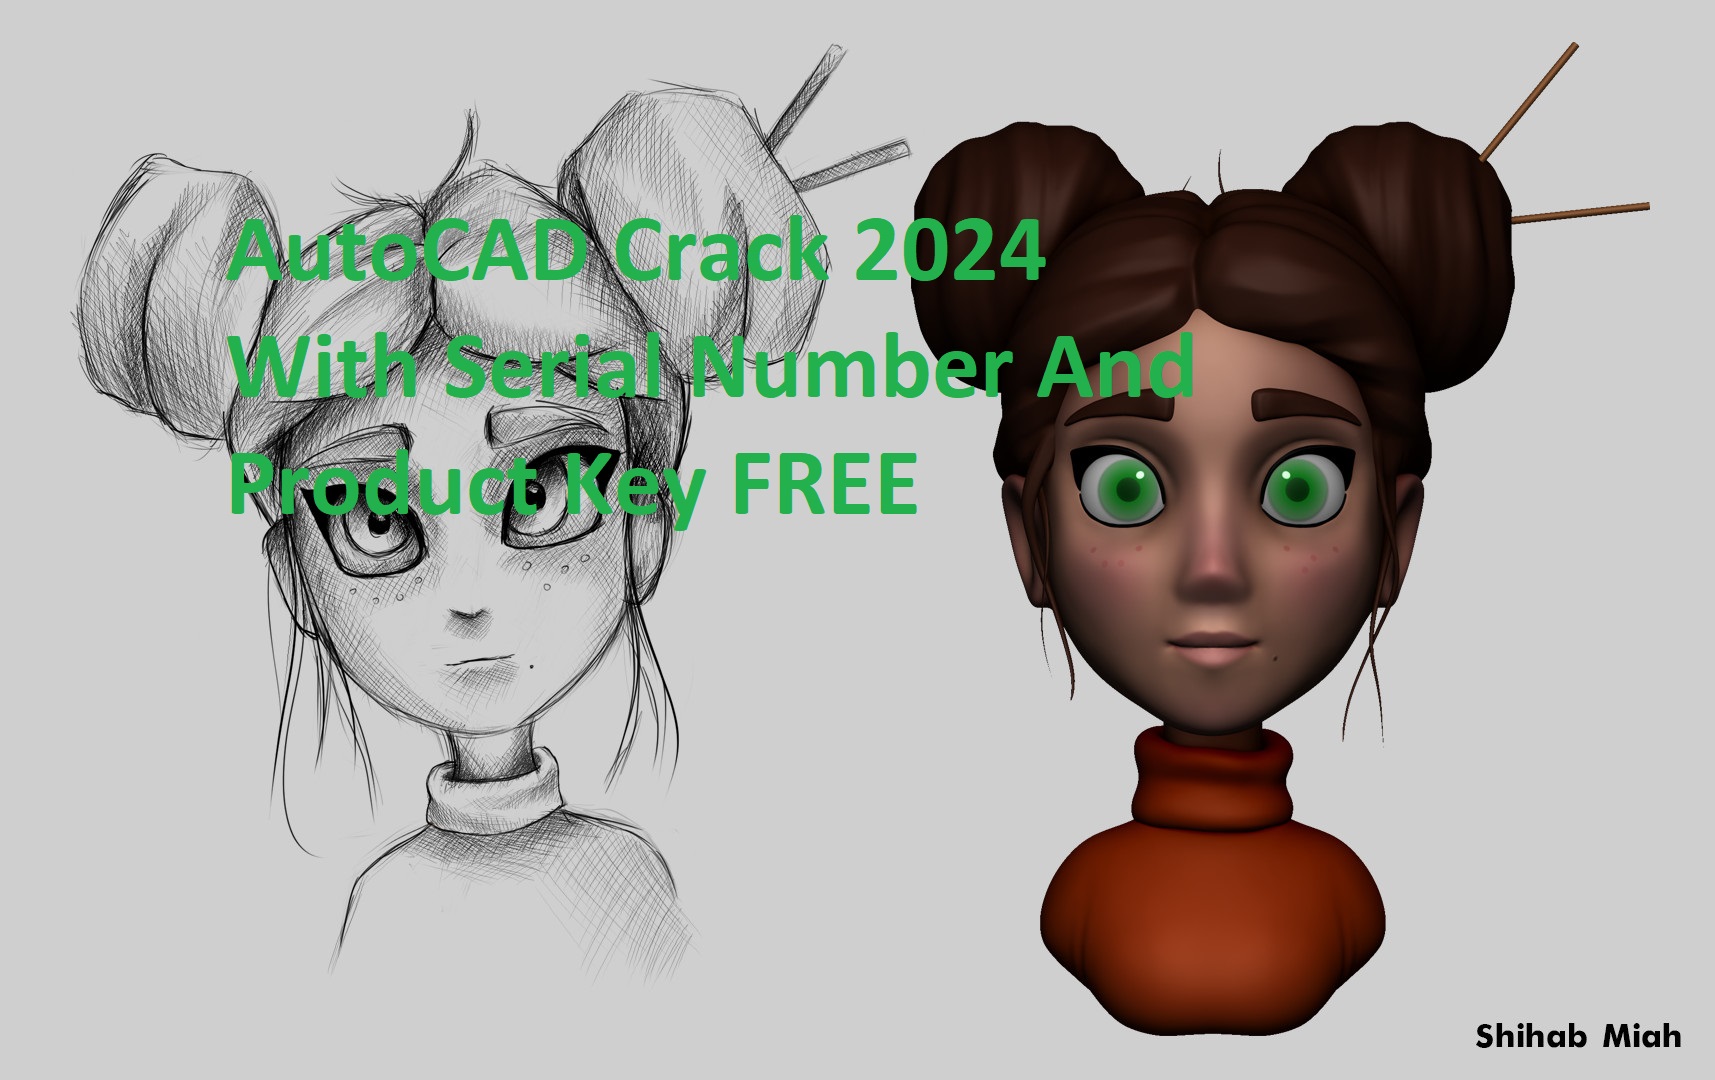 AutoCAD Crack 2024 With Serial Number And Product Key FREE